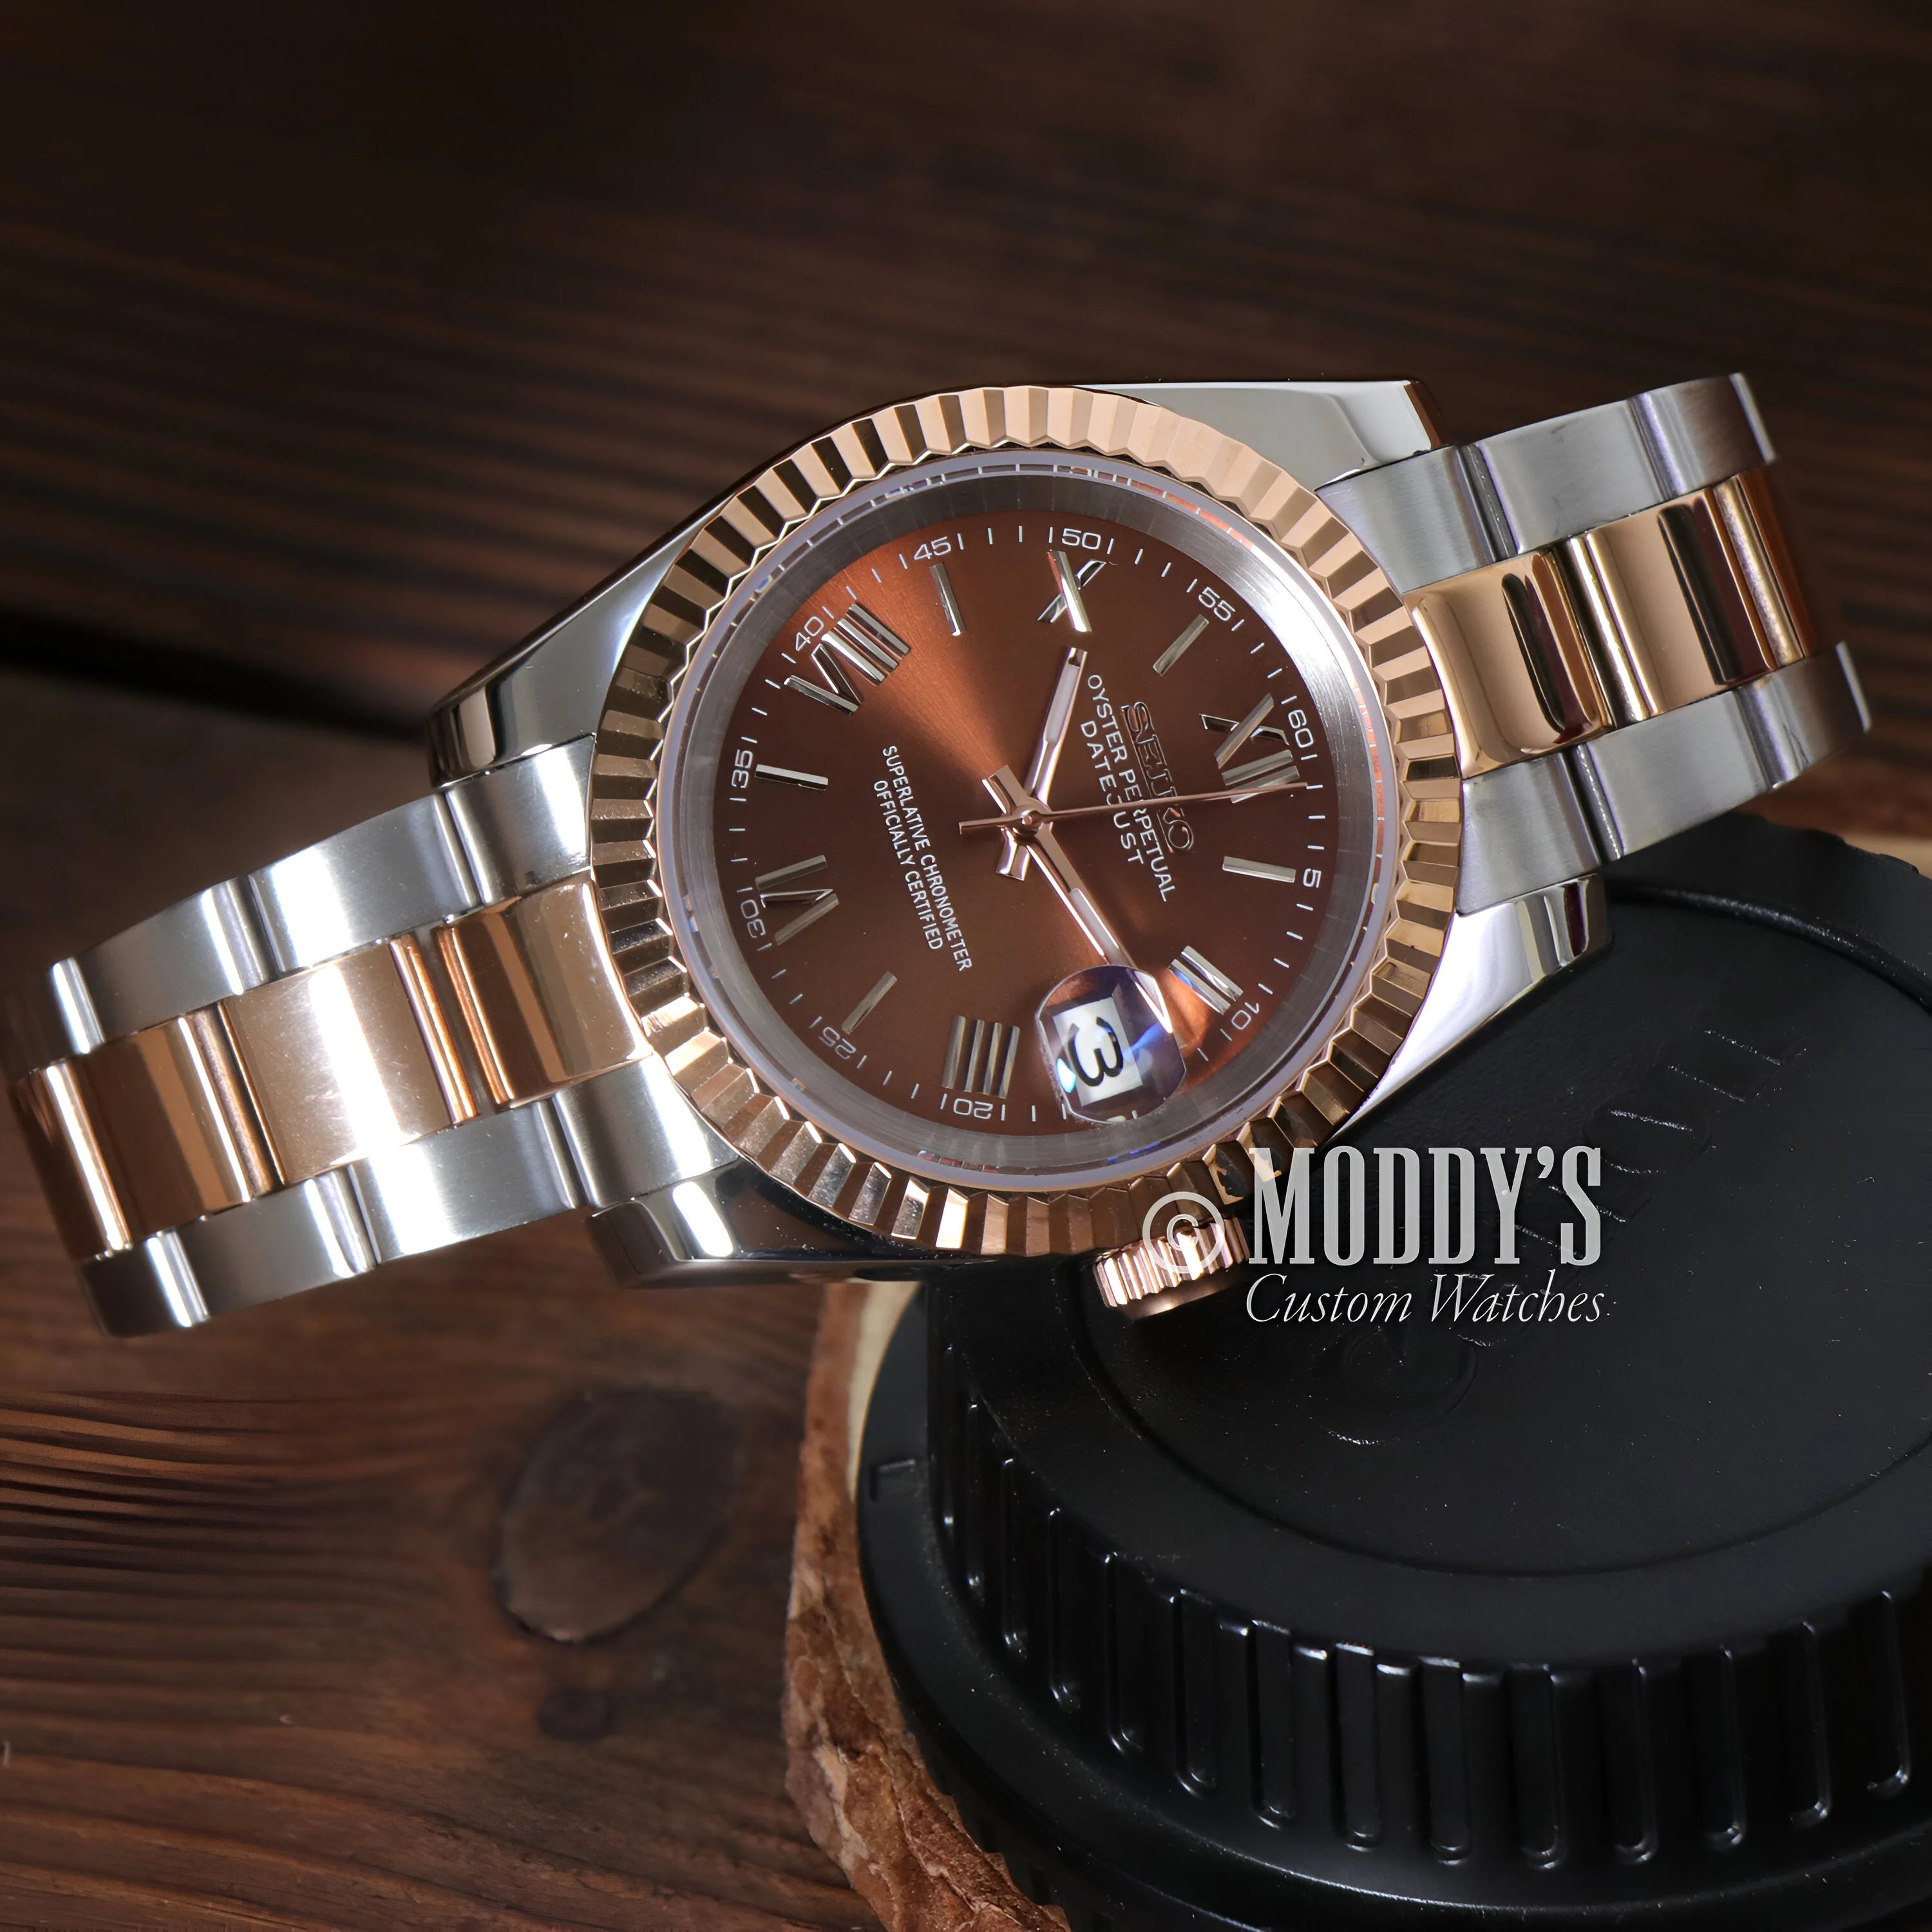 Luxury Seiko Mod Watch With Two-tone Band And Brown Dial, Seikojust Chocolate Roman